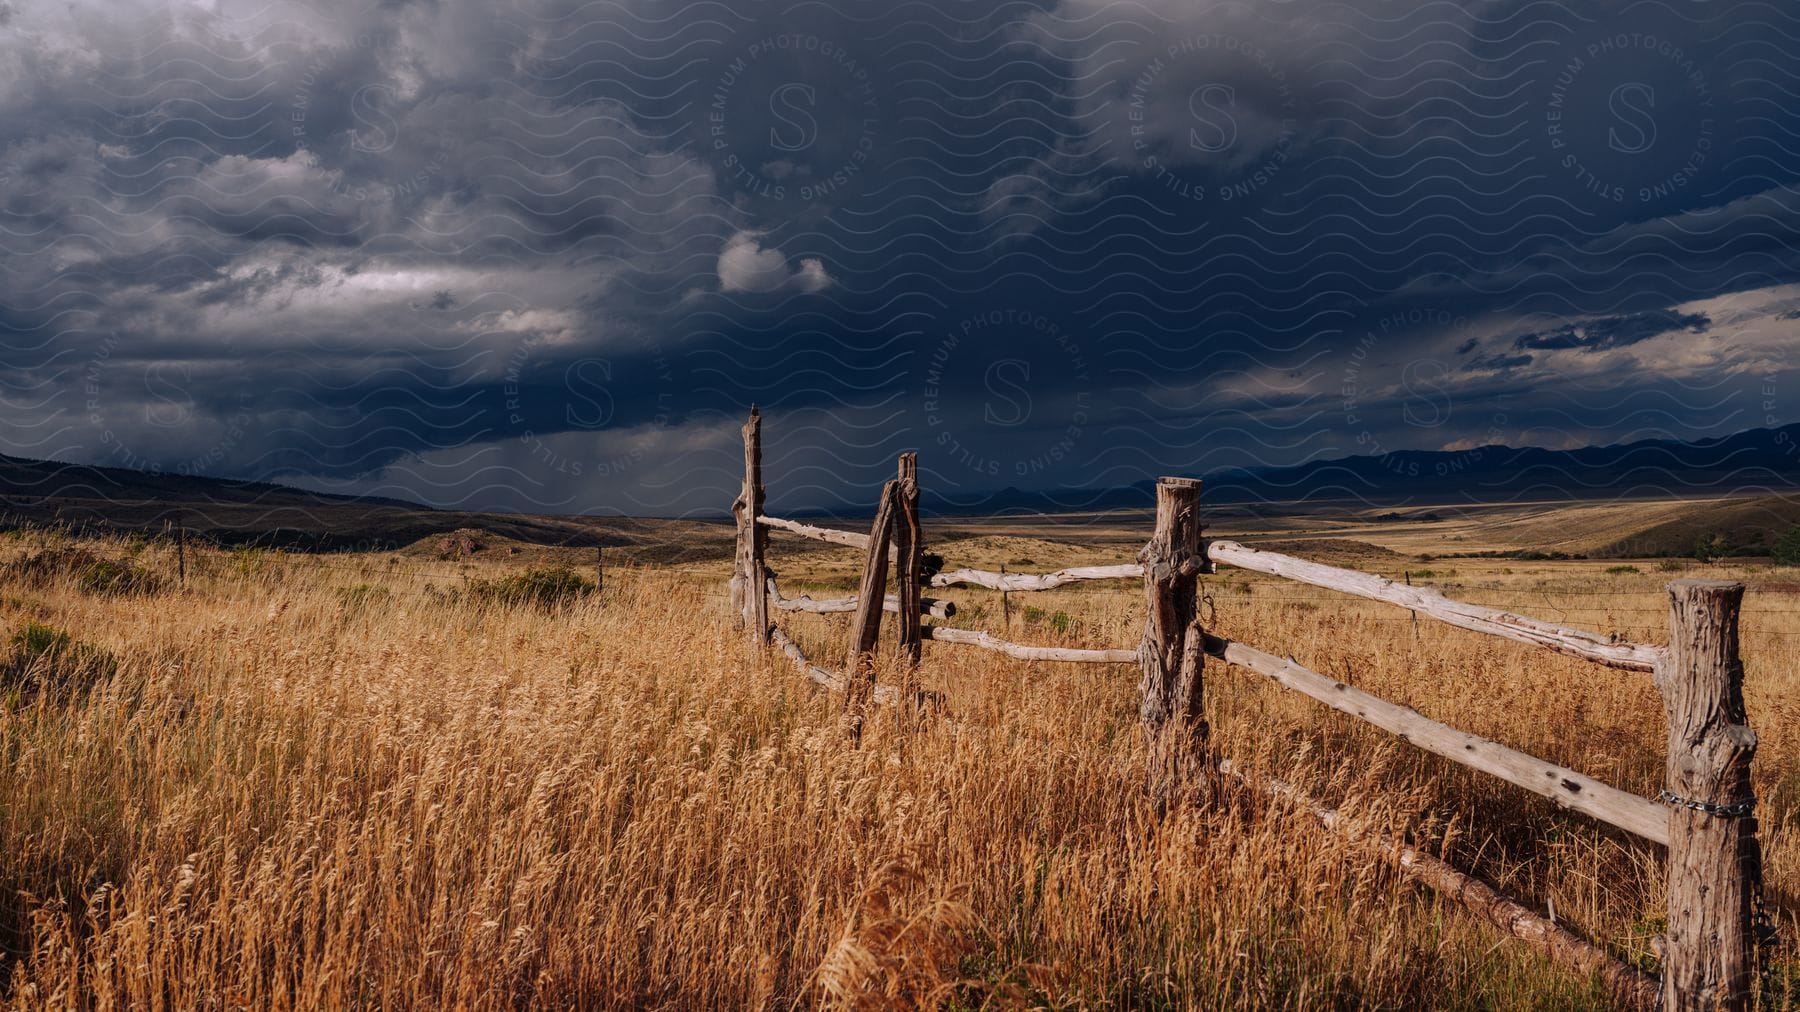 Fence in a rural field with mountains in the distance under a dark cloudy sky